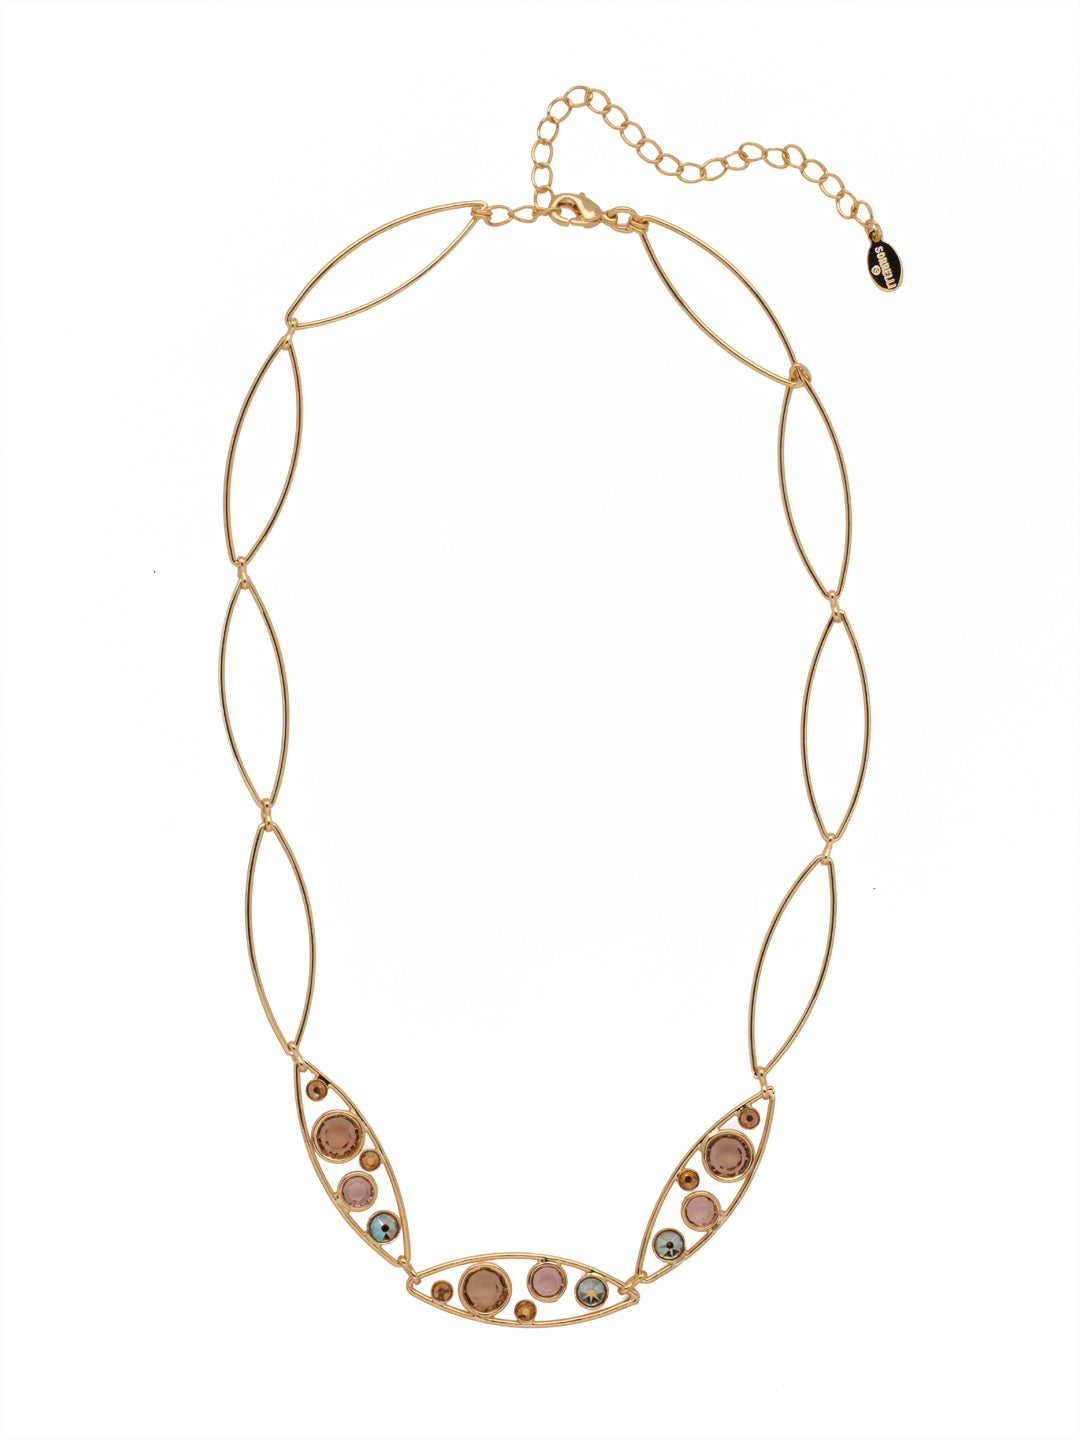 Charlene Triple Tennis Necklace - NFC52BGRSU - <p>The Charlene Triple Tennis Necklace combines oblong metal hoops and delicate crystal channels to create a gorgeous twist on the classic tennis necklace. From Sorrelli's Raw Sugar collection in our Bright Gold-tone finish.</p>